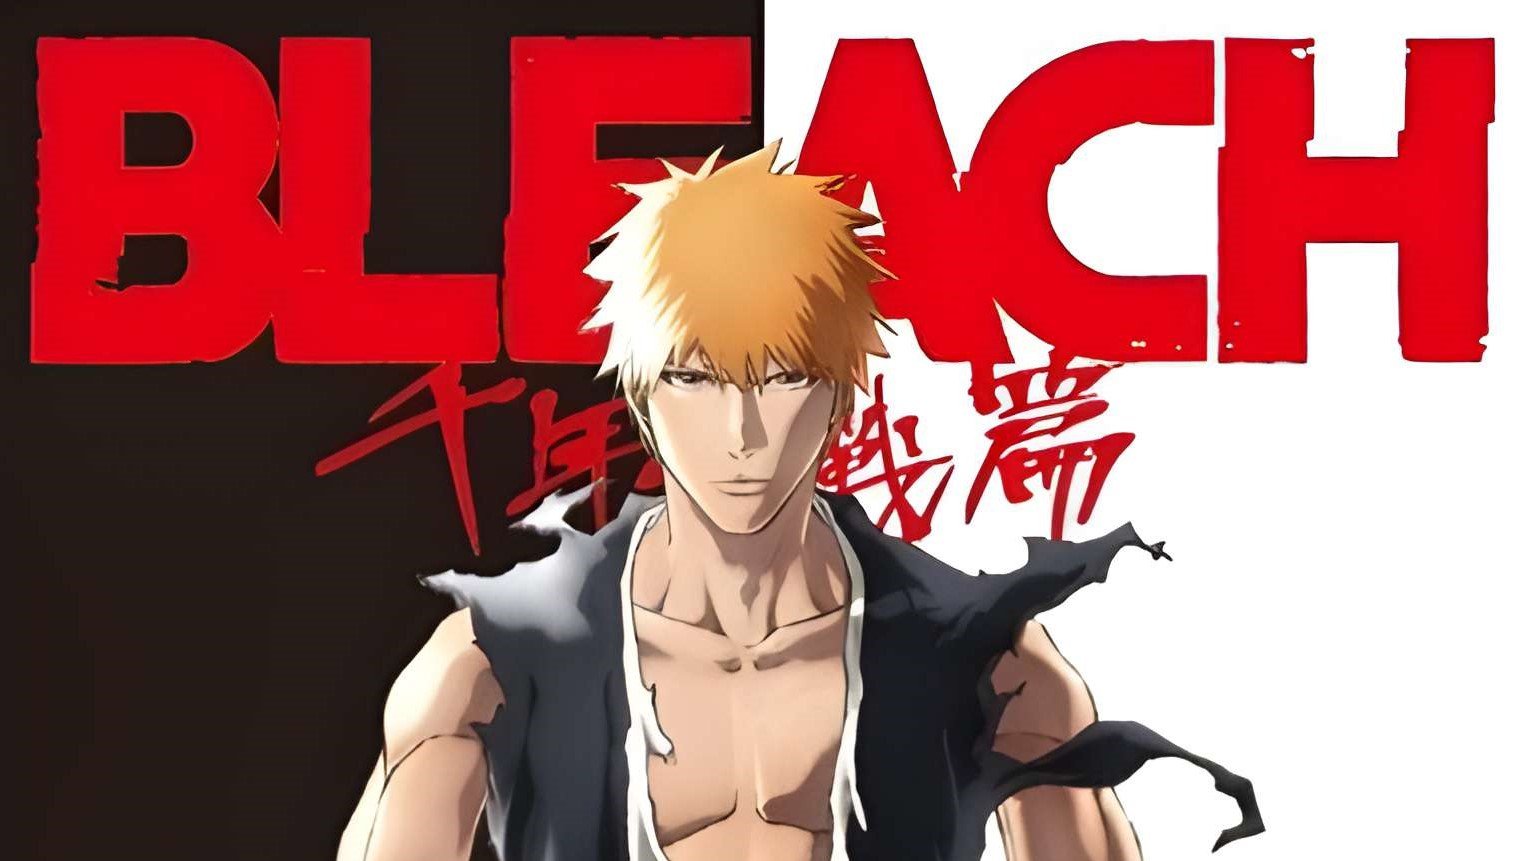 How Bleach Characters Changed in Bleach: TYBW 